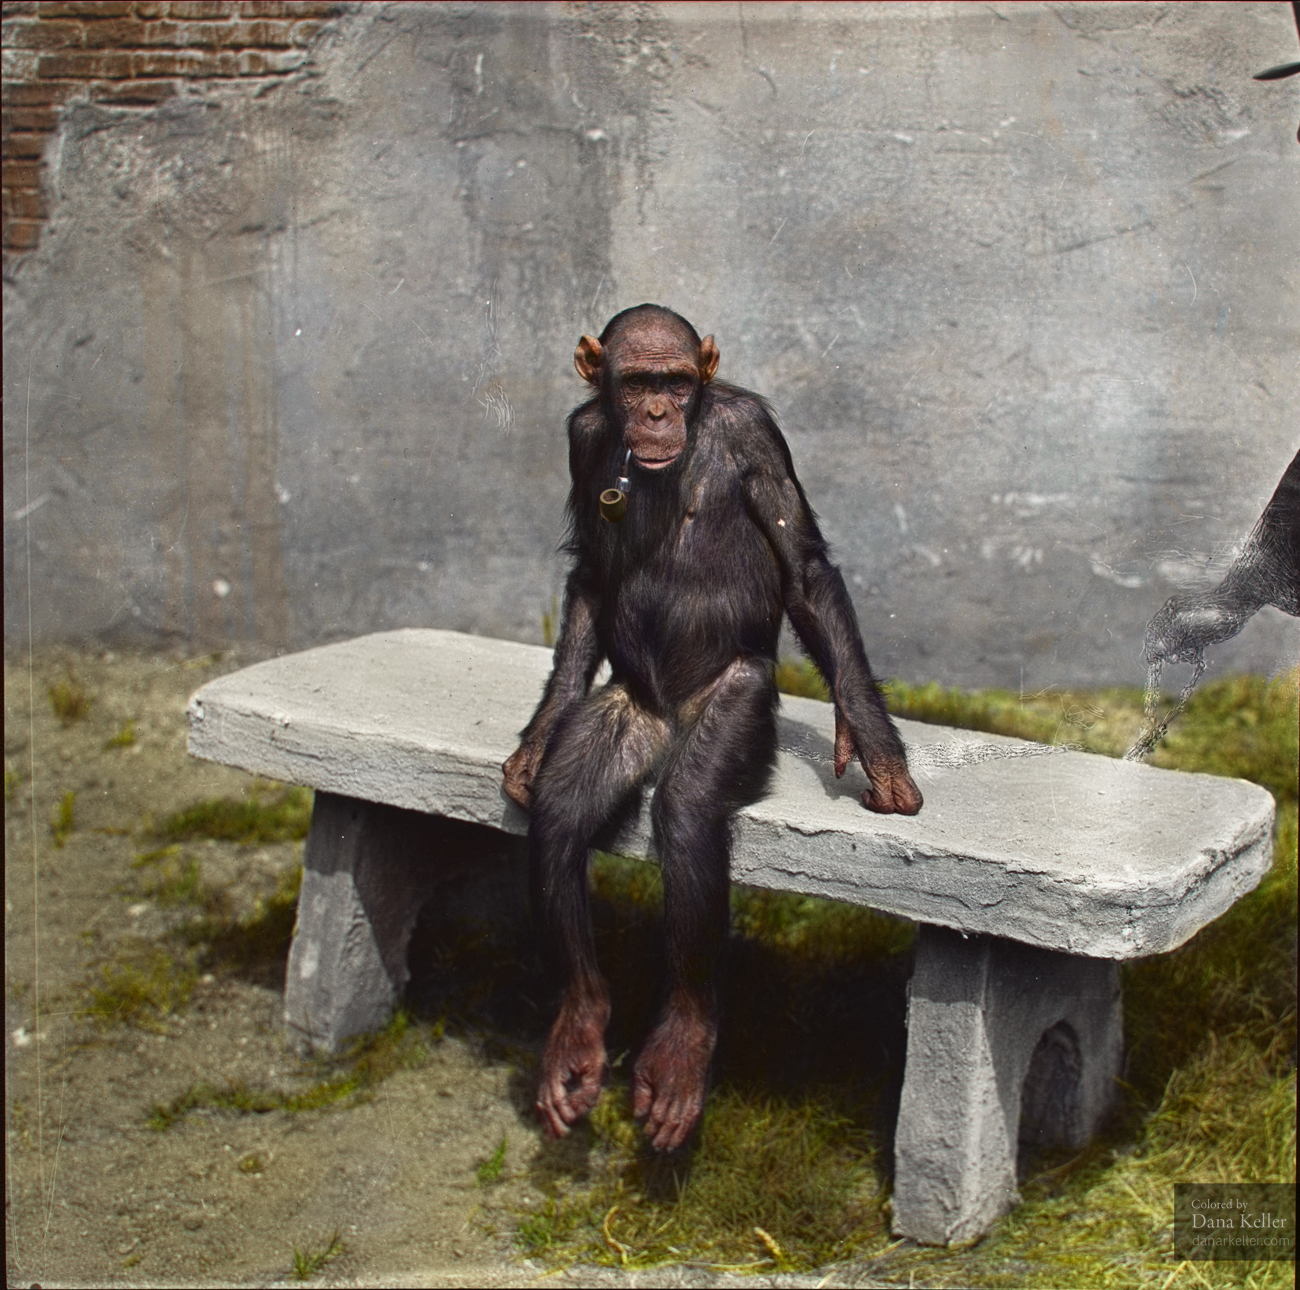 Chimpanzee "Mary" sitting on a bench with a pipe, ca 1940